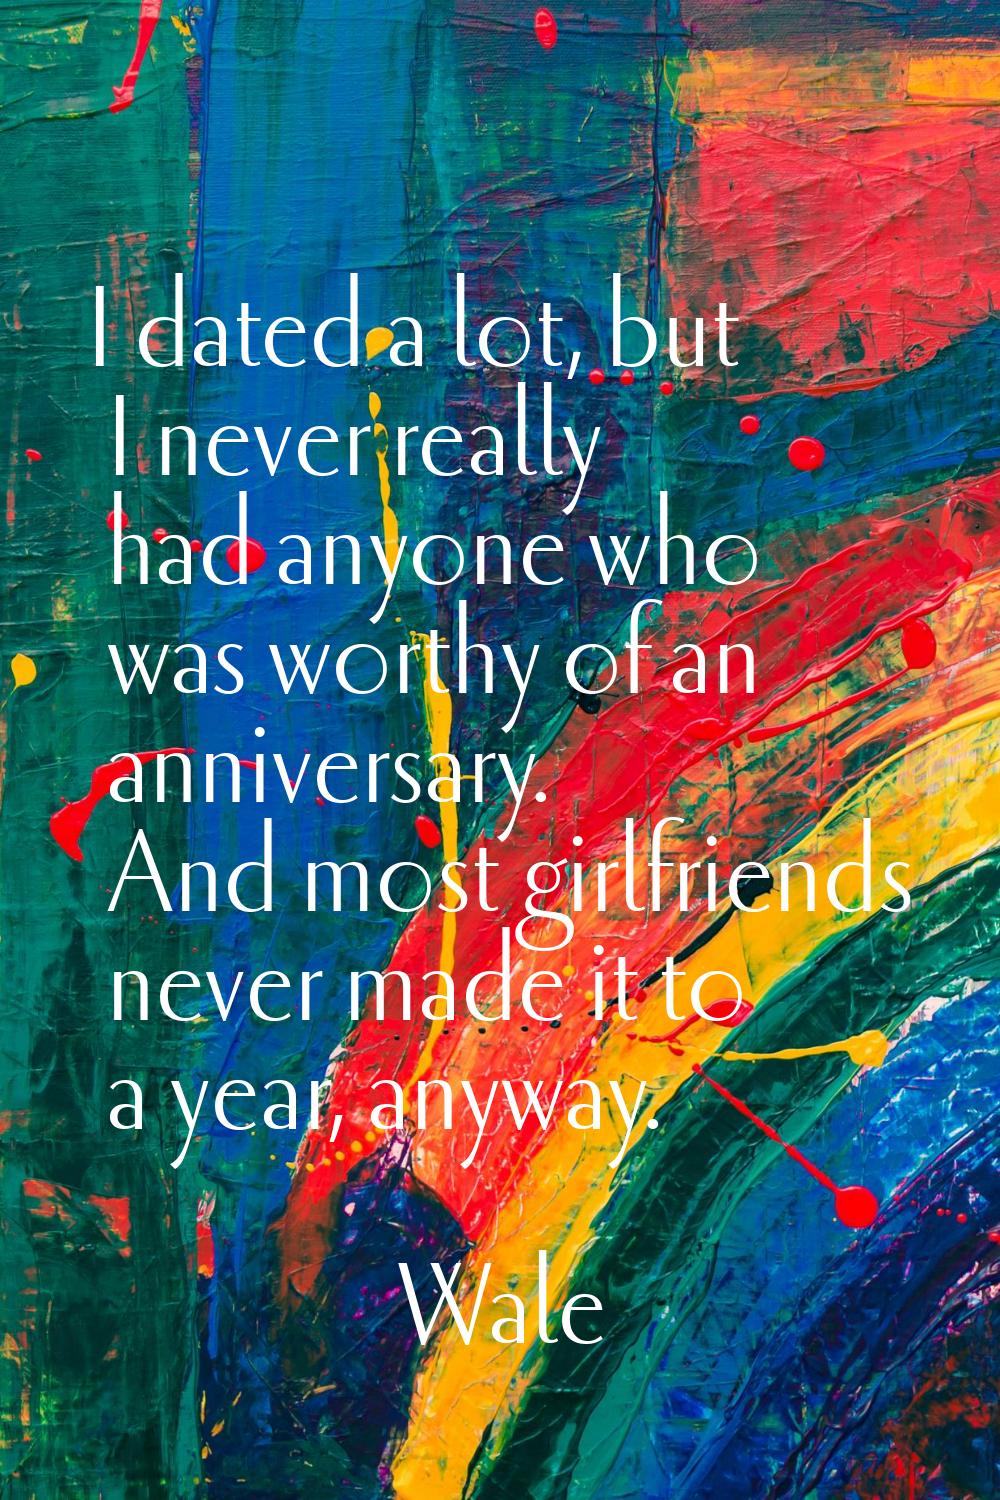 I dated a lot, but I never really had anyone who was worthy of an anniversary. And most girlfriends